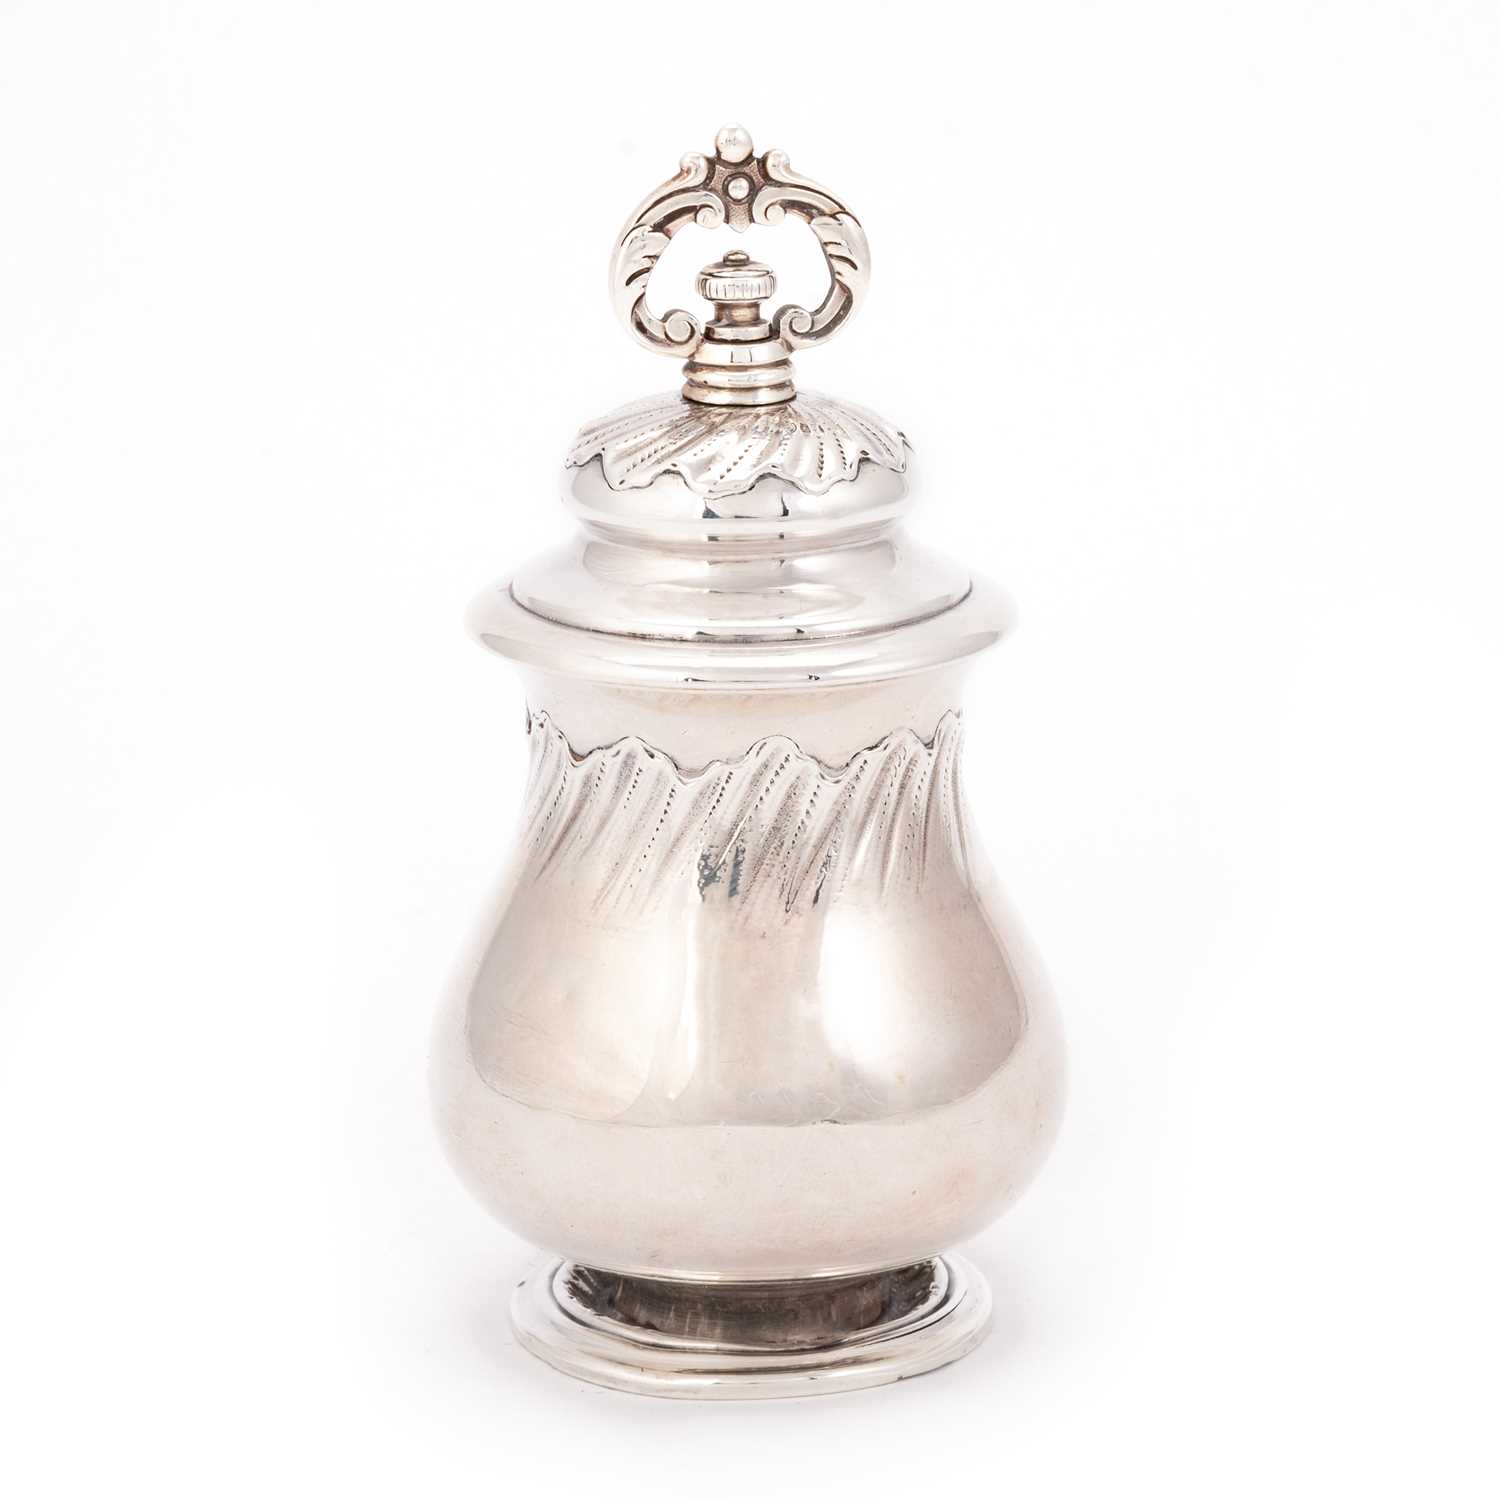 A 19TH CENTURY FRENCH SILVER PEPPER GRINDER